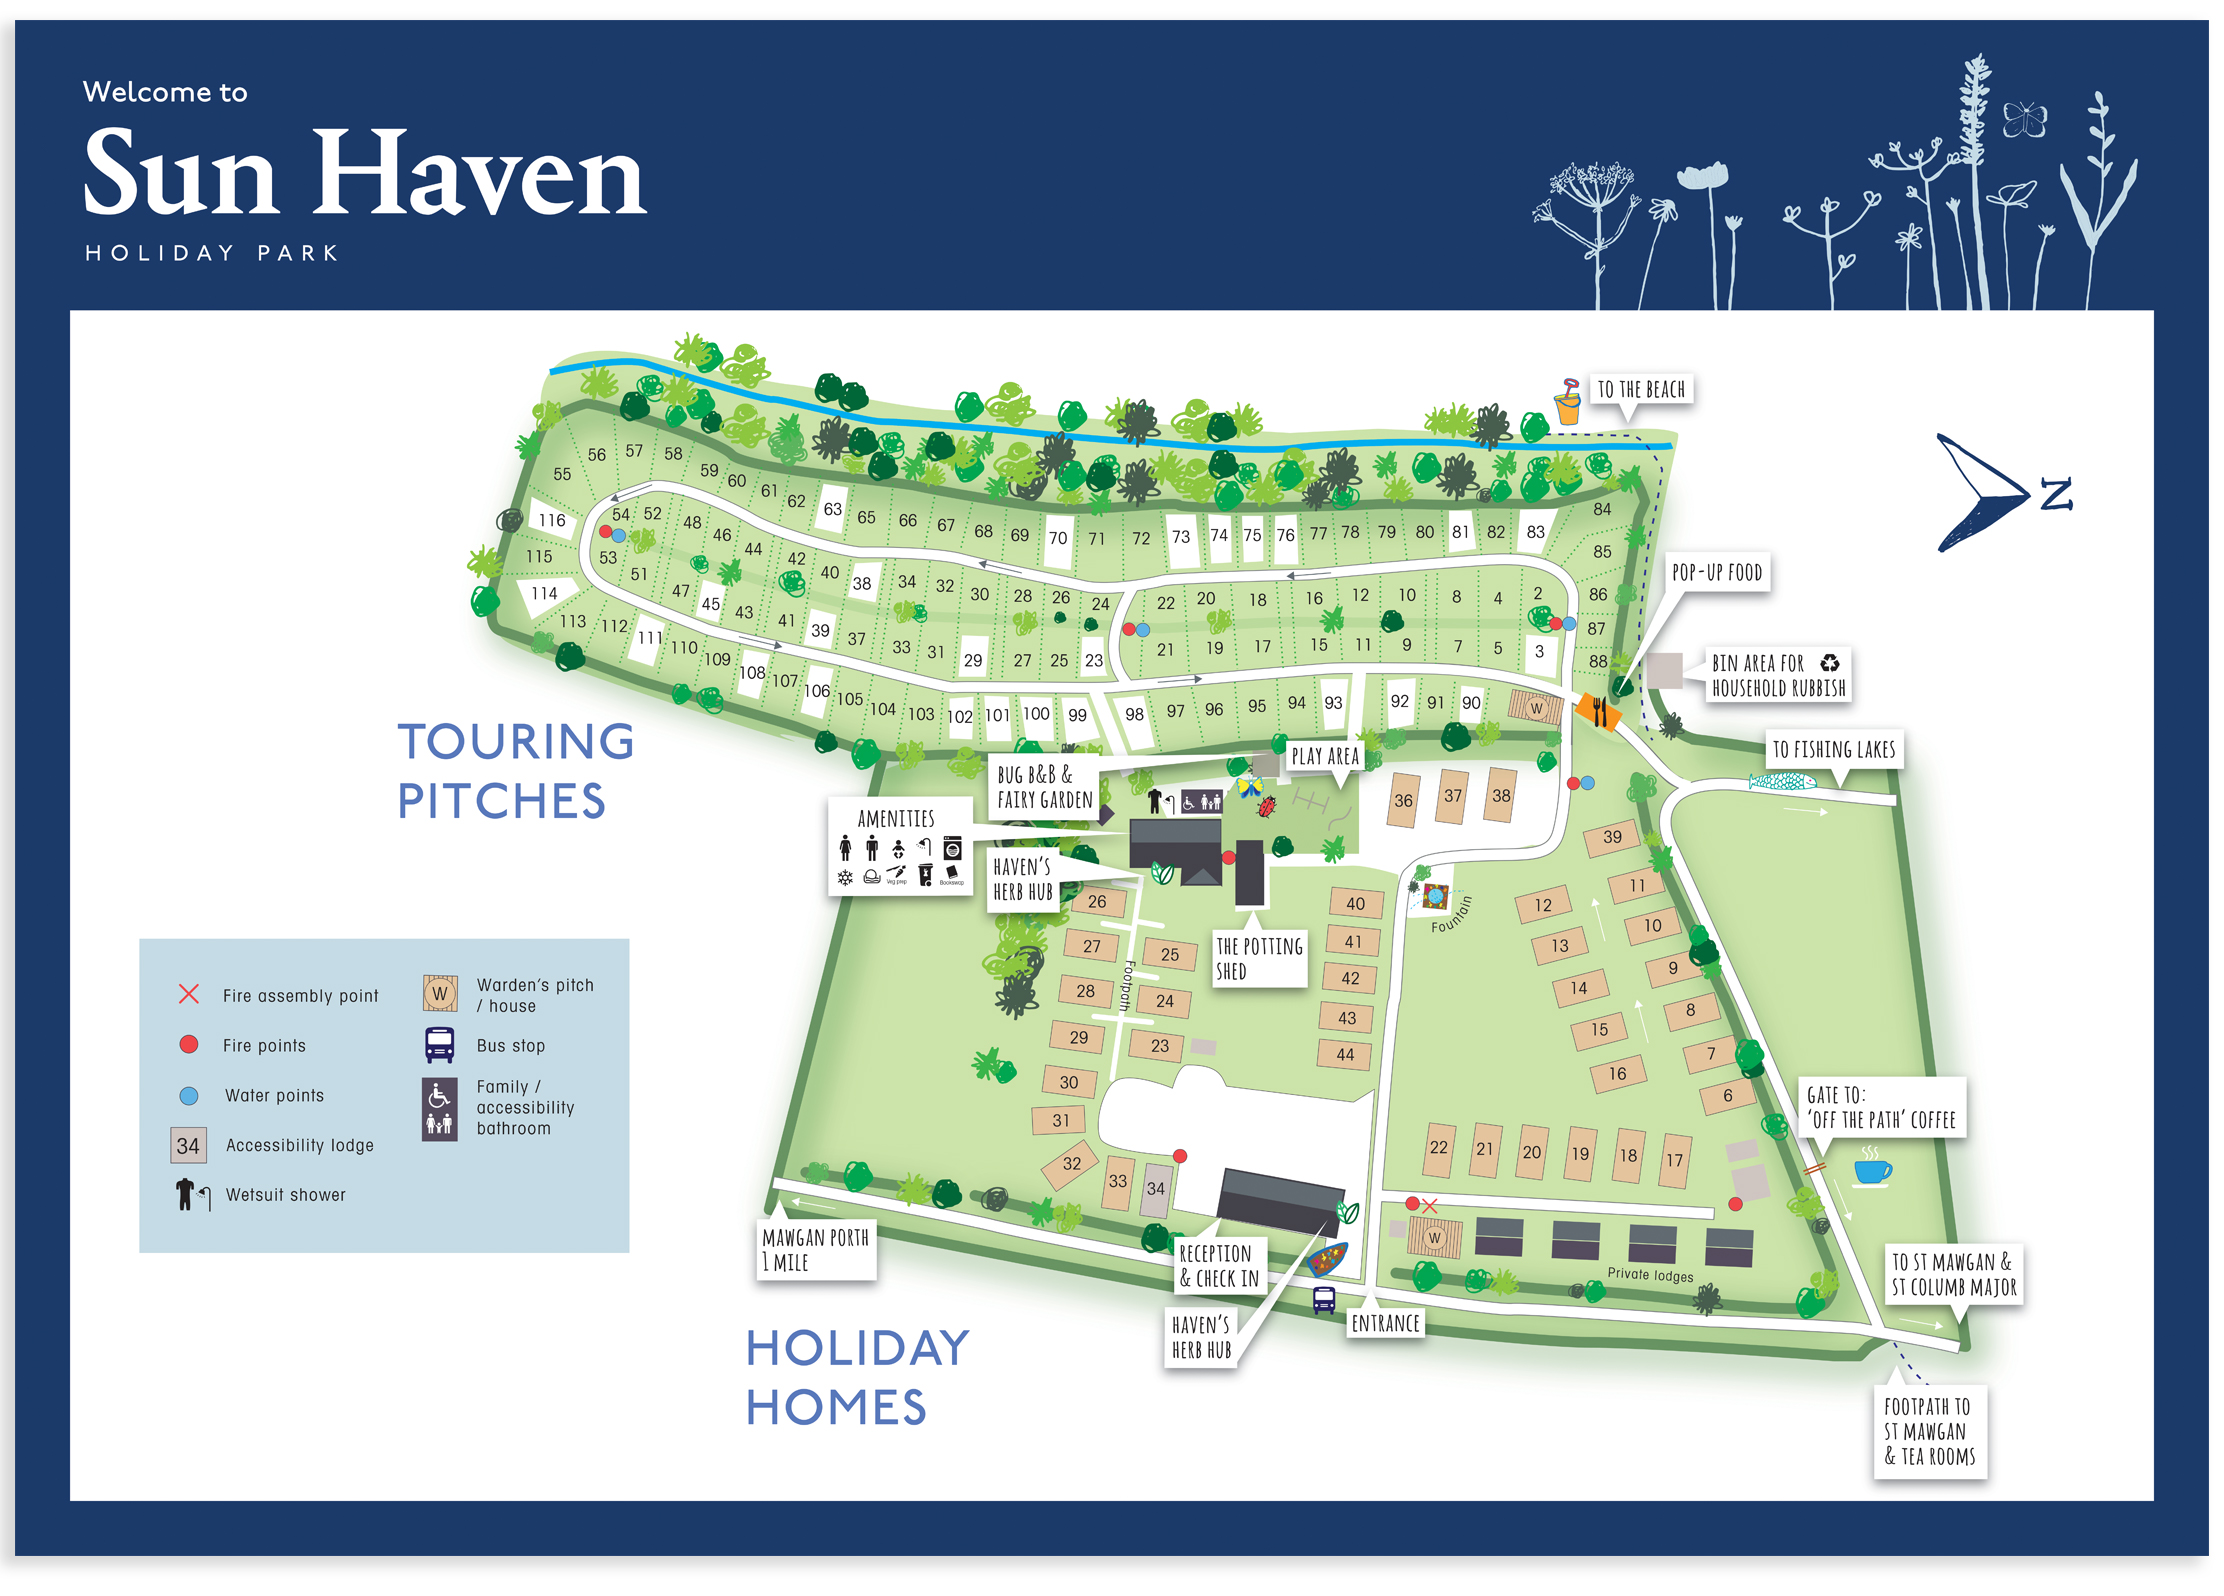 sun haven holiday park